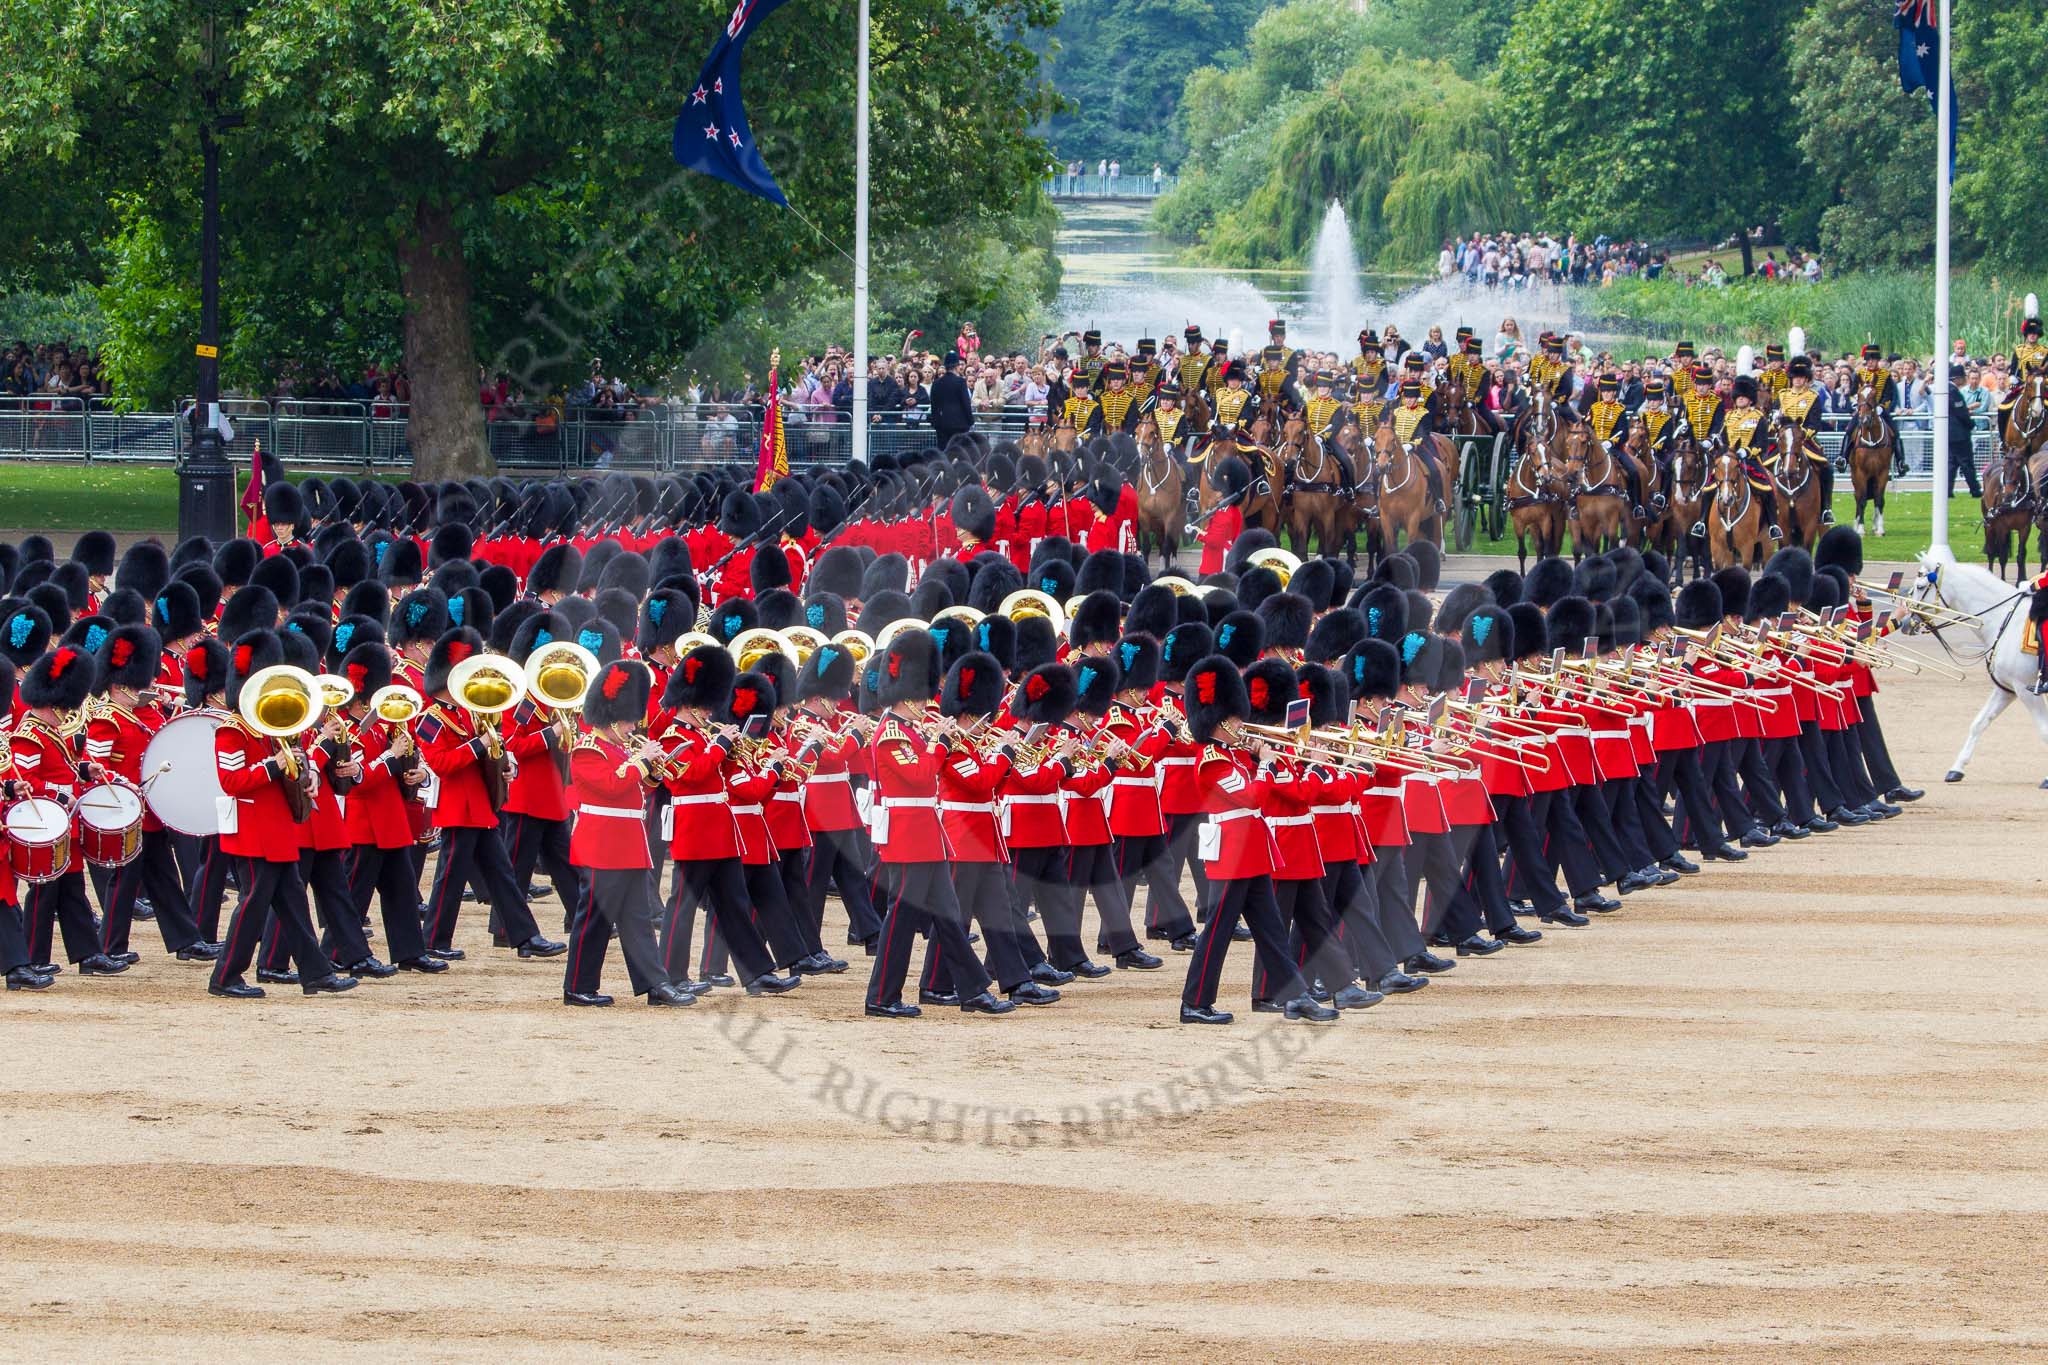 Trooping the Colour 2014.
Horse Guards Parade, Westminster,
London SW1A,

United Kingdom,
on 14 June 2014 at 11:33, image #589